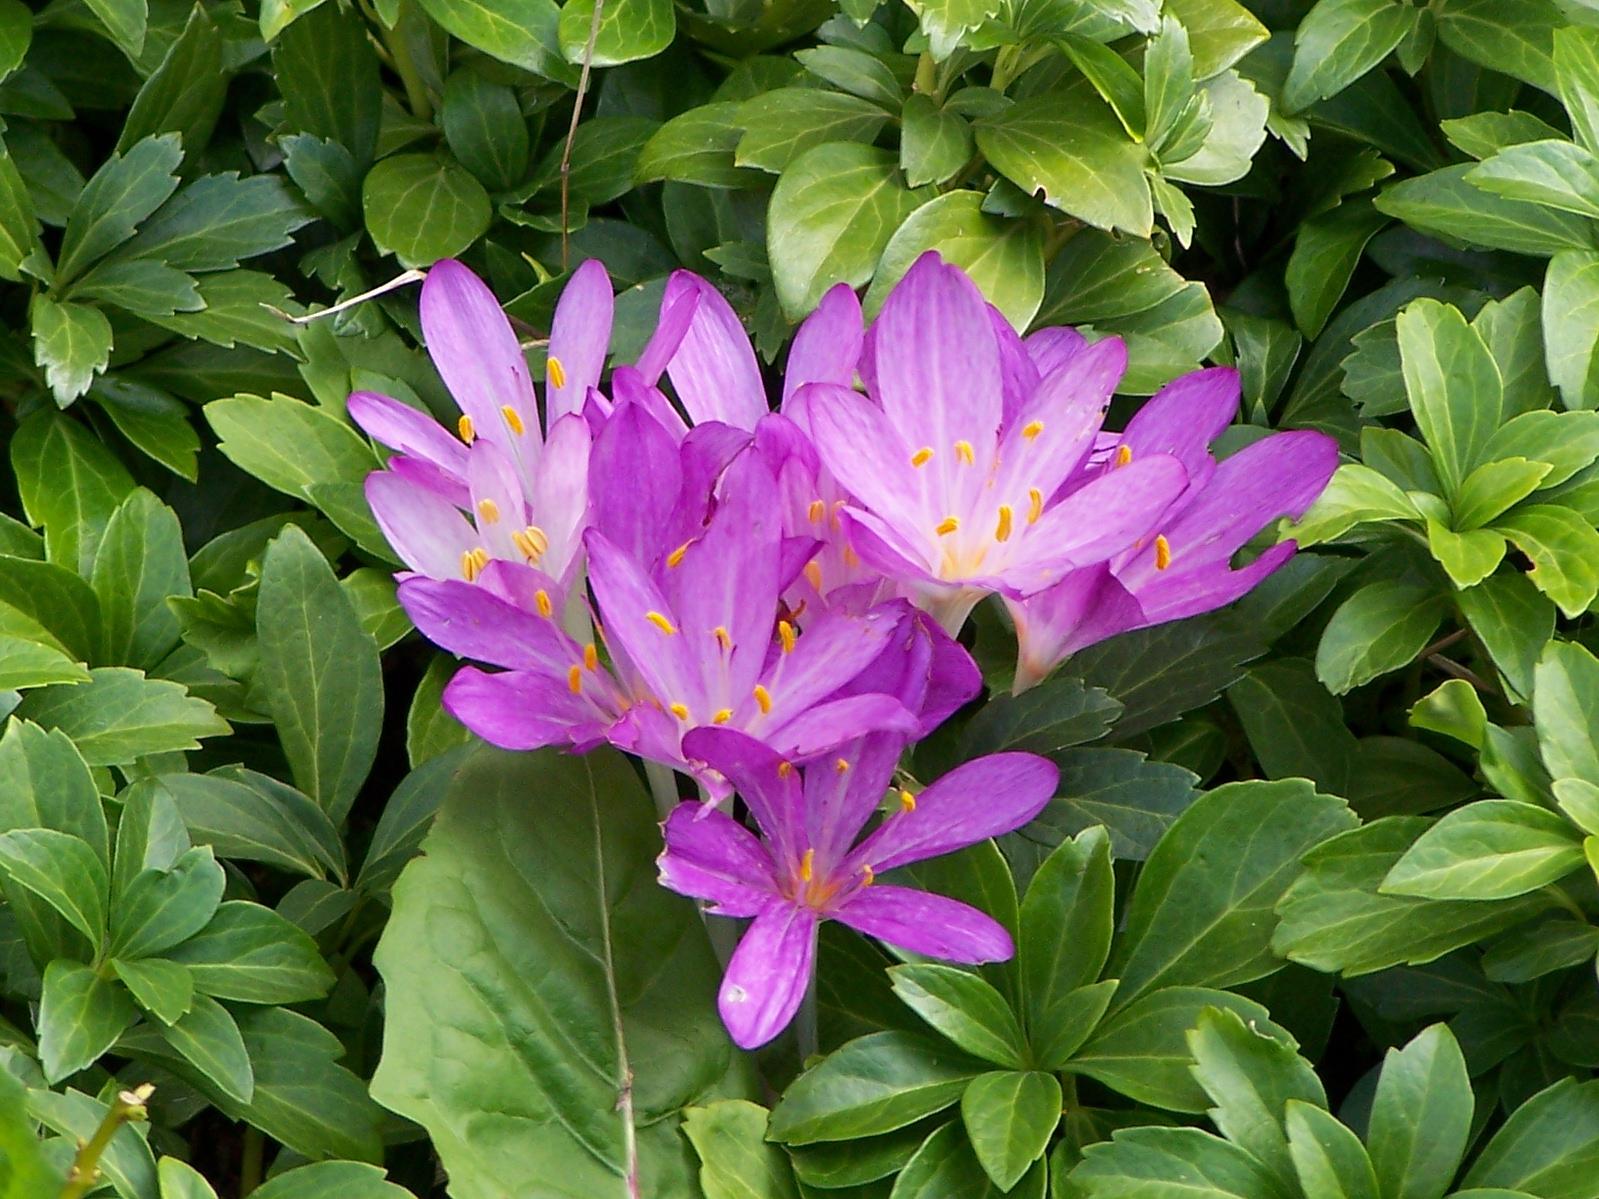 purple-white flowers with purple-white filaments, orange anthers, green foliage and brown stems